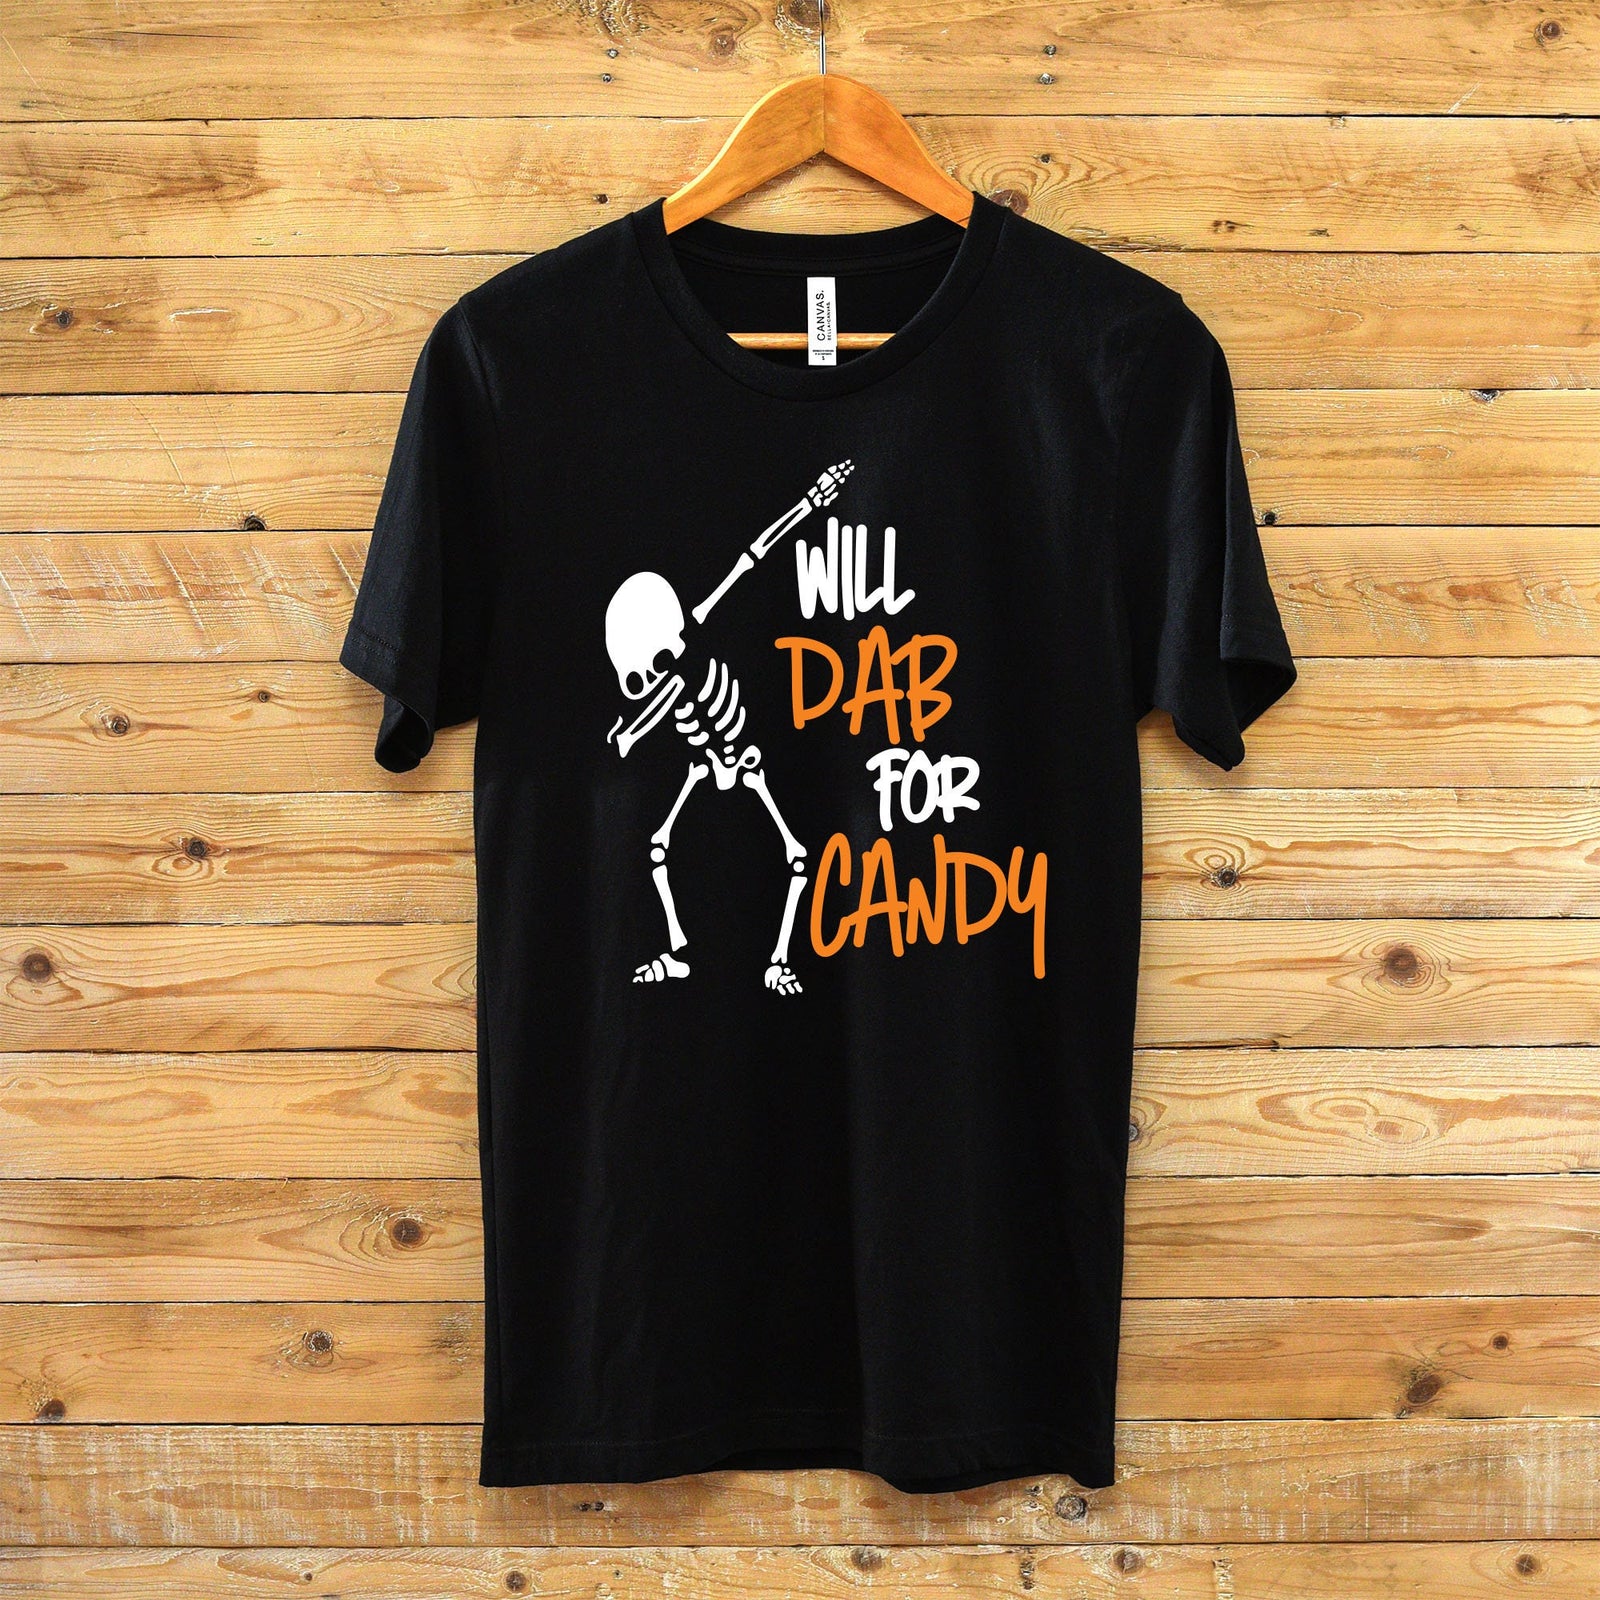 Will Dab for Candy - Happy Halloween Adult T Shirt - Halloween - Office - School - Funny T Shirt